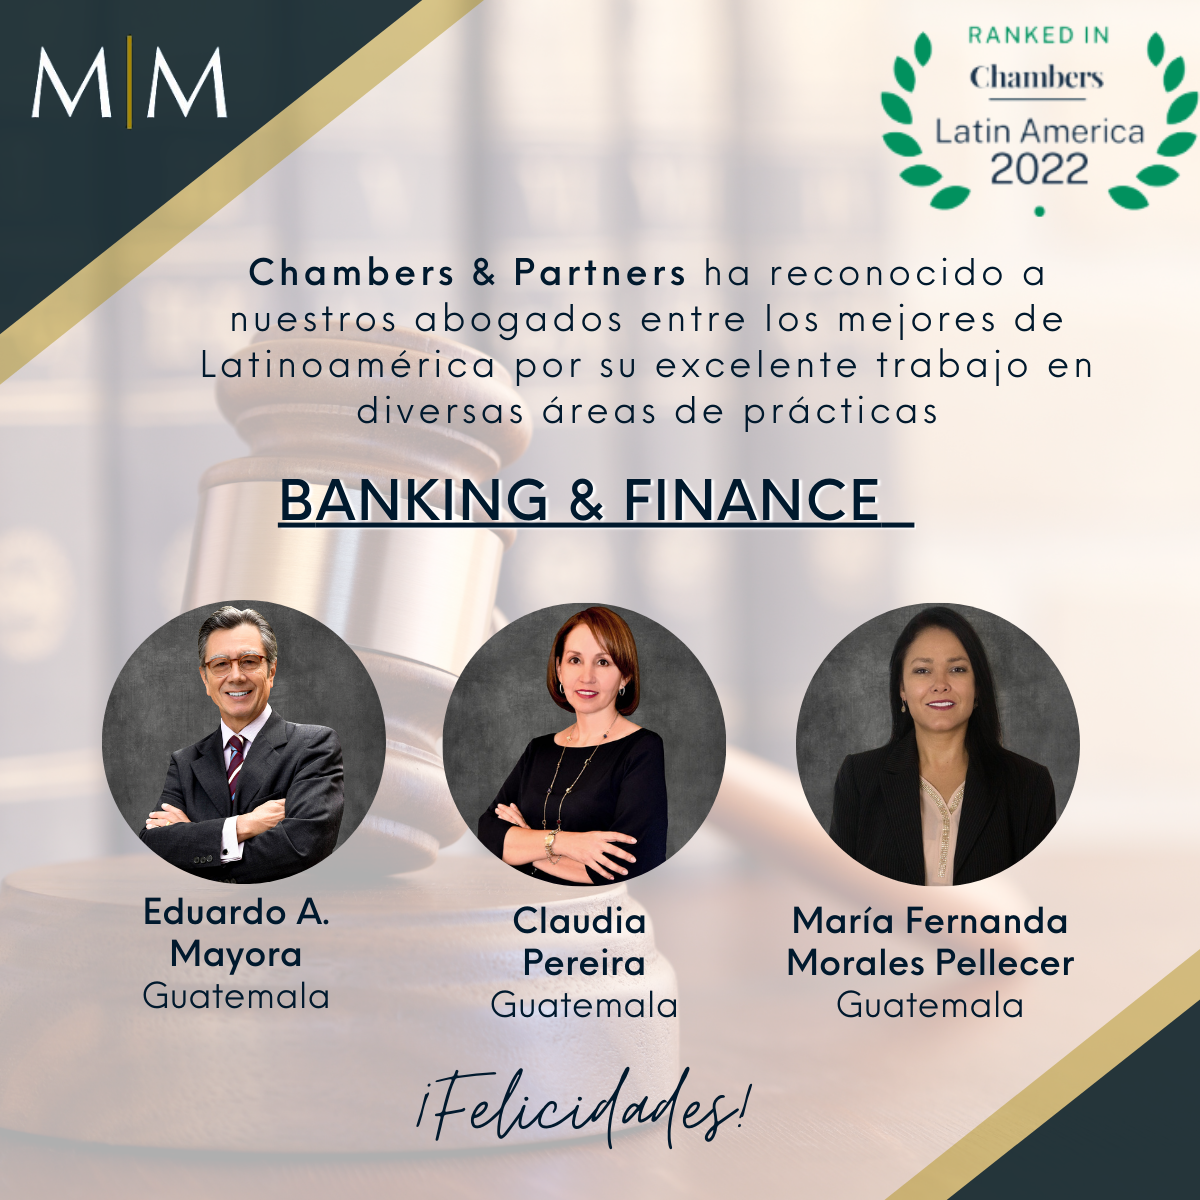 You are currently viewing M&M Reconocimiento- Chambers & Partners “Banking & Finance”